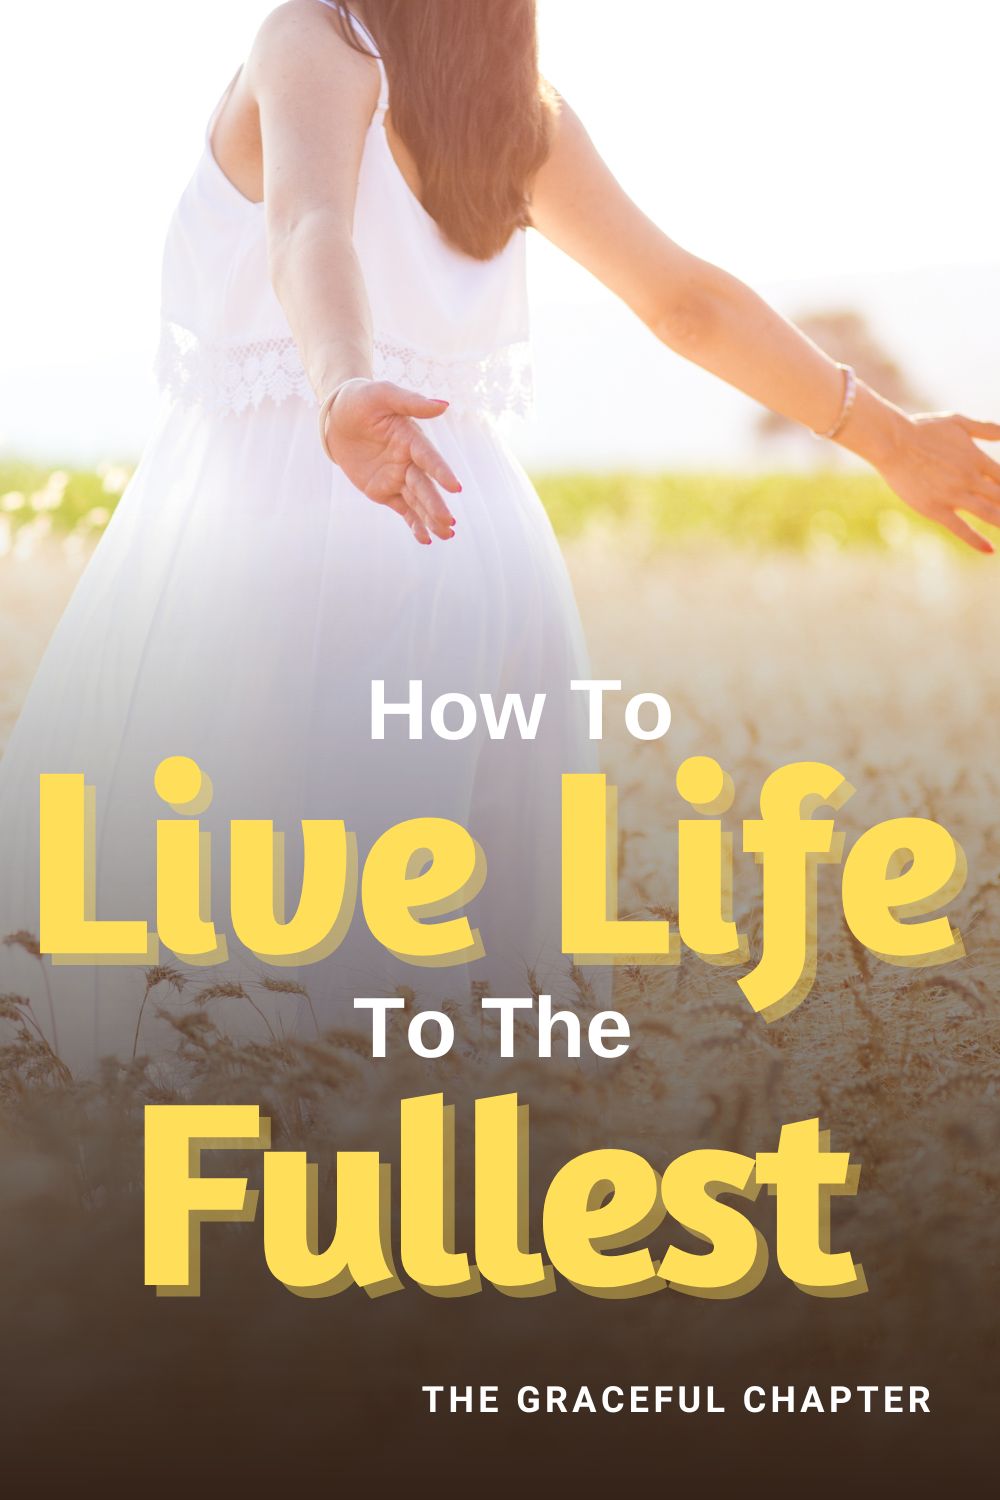 How To Live Life To The Fullest